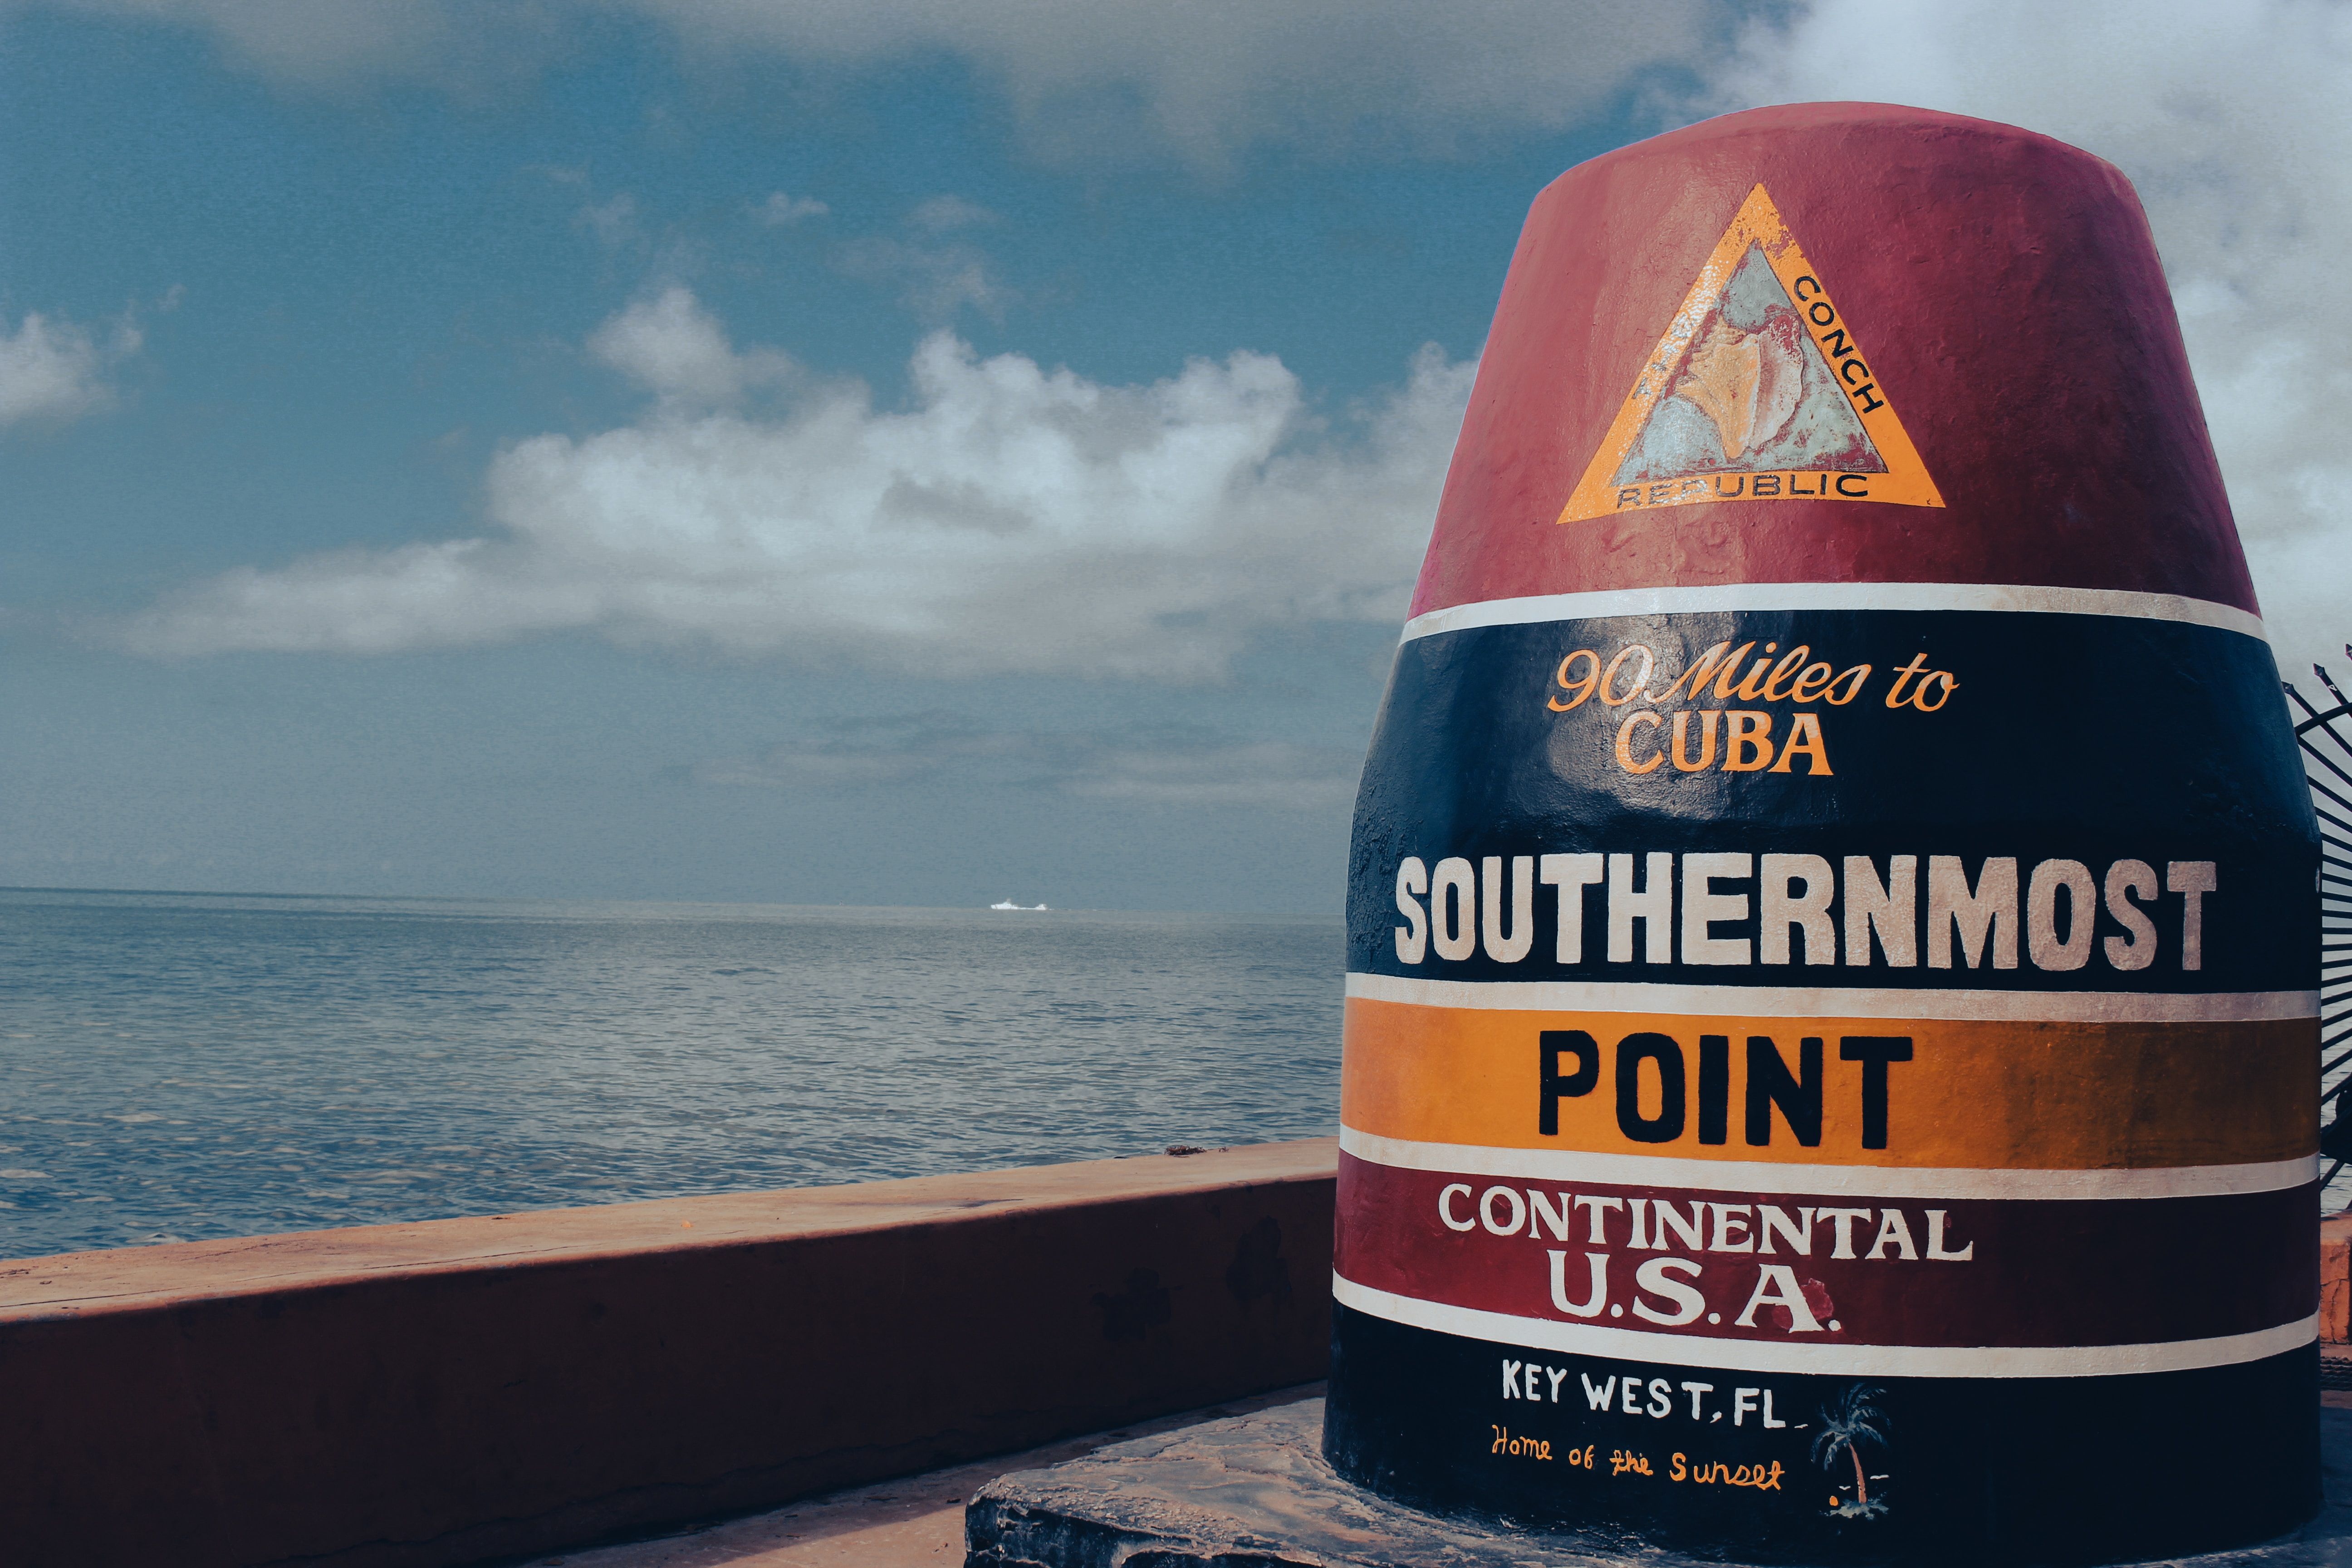 Southernmost Point of the US Marker, Key West